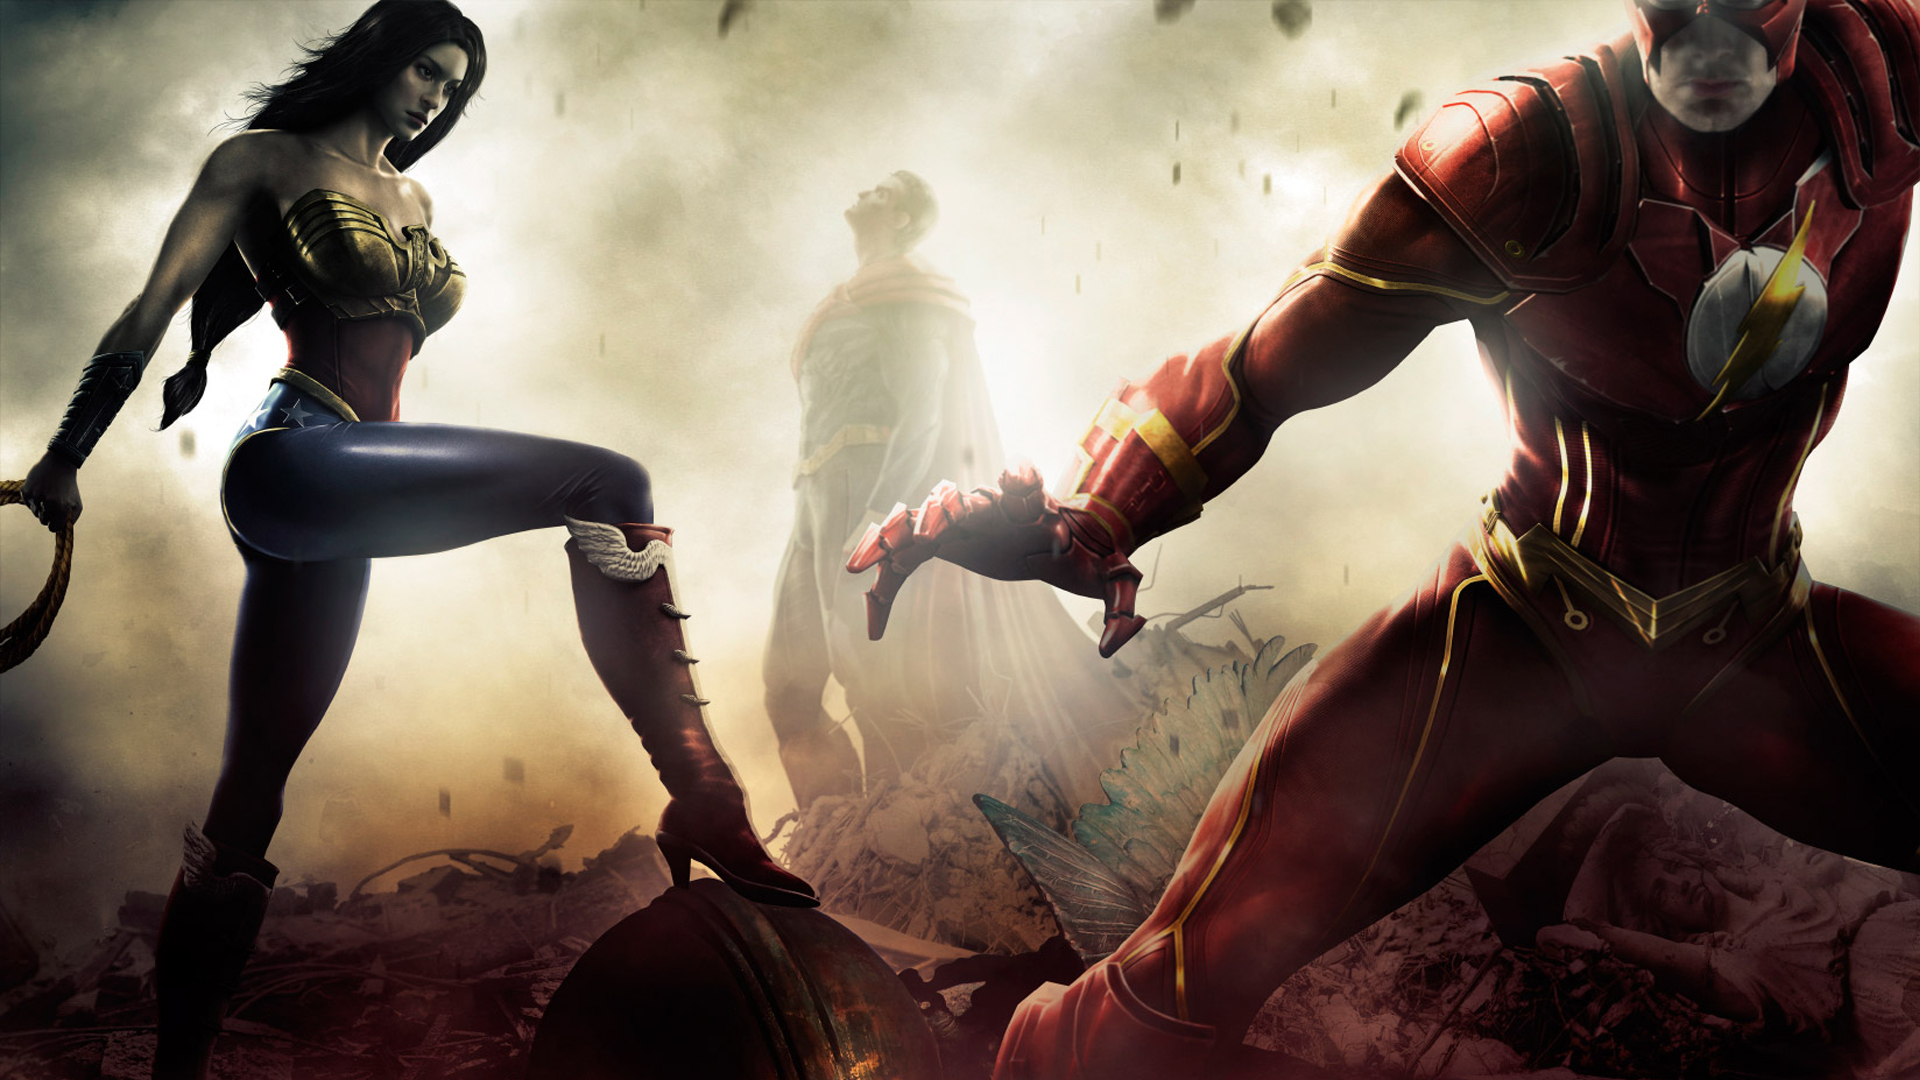 Free HD injustice: gods among us, video game, injustice